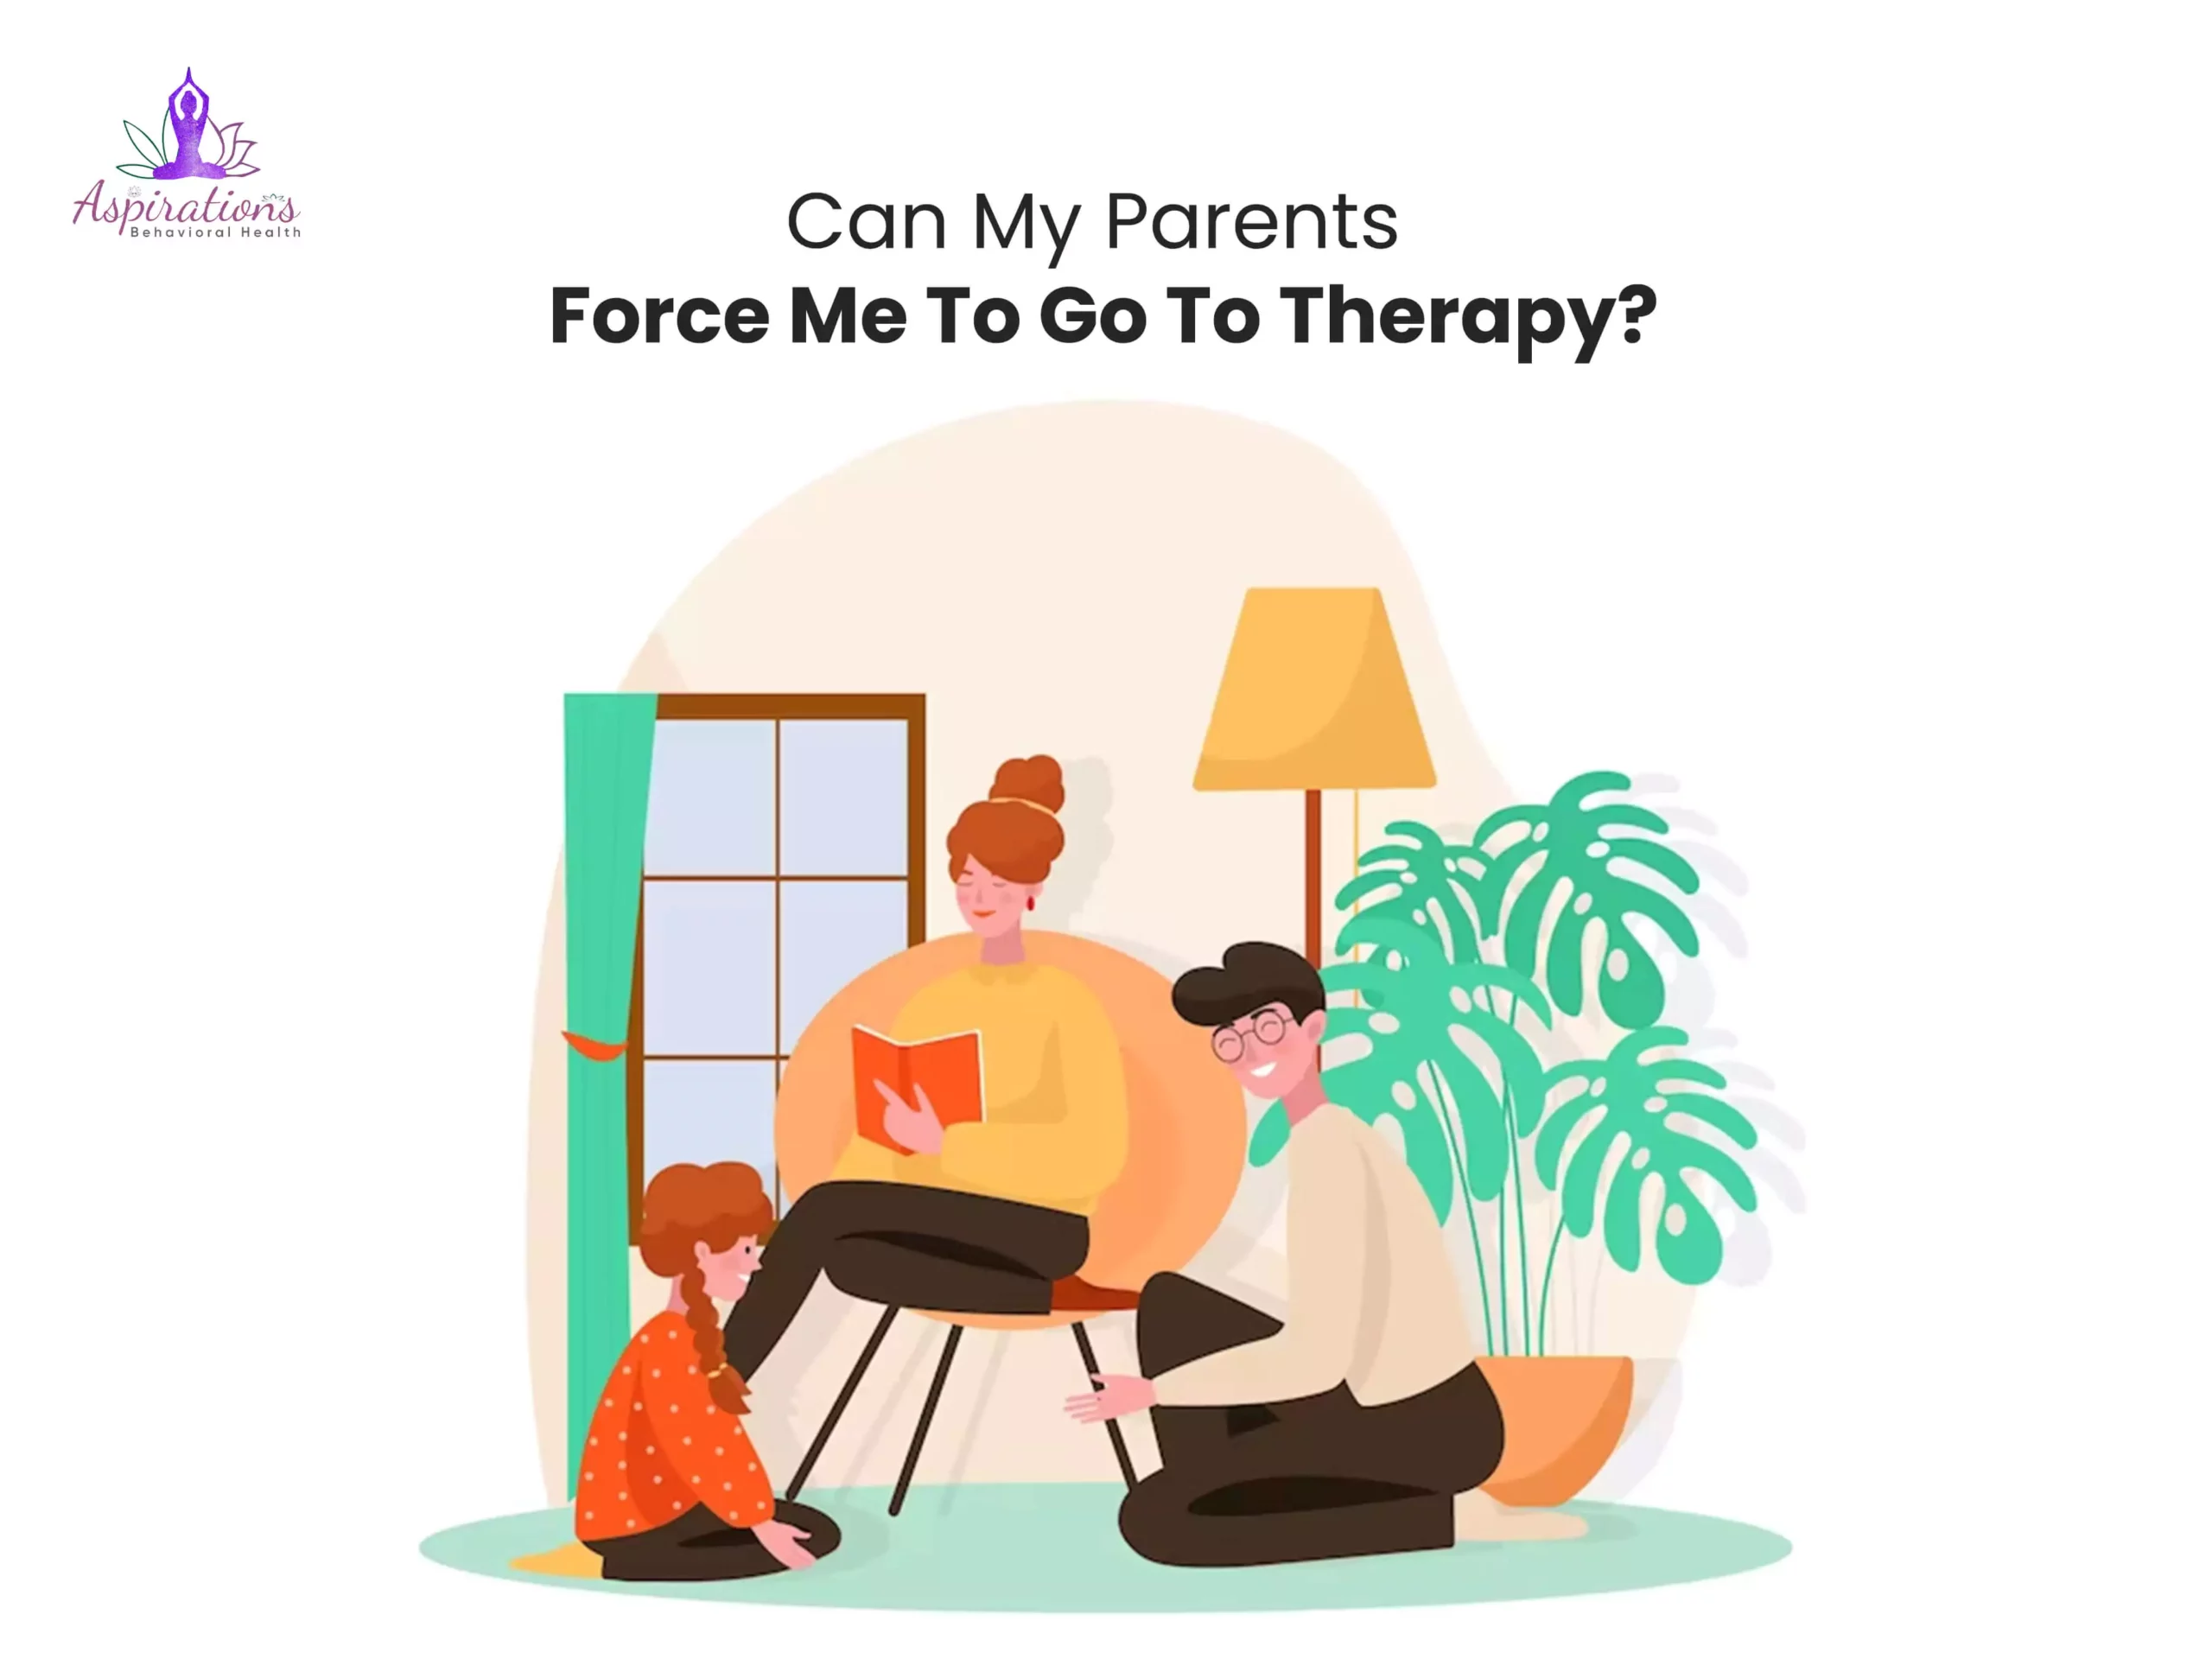 Can My Parents Force Me To Go To Therapy?